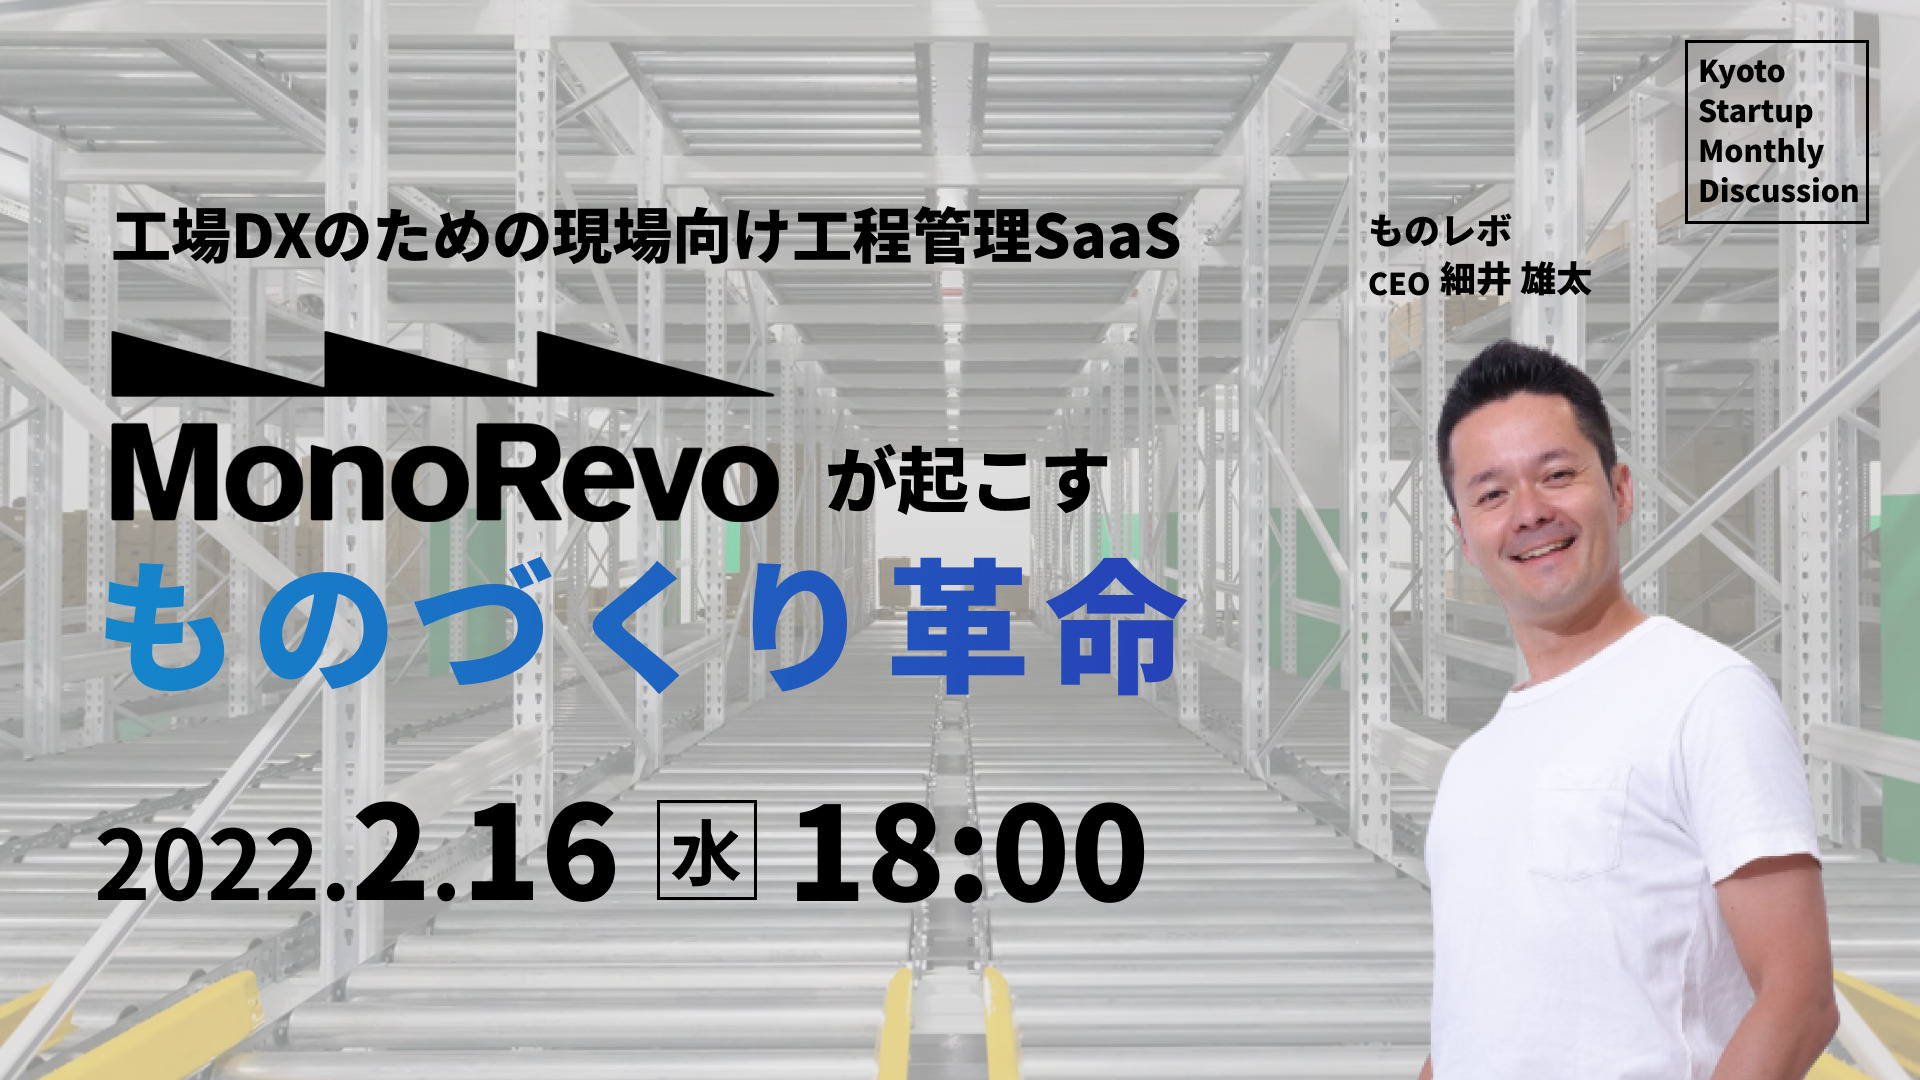 Kyoto Startup Monthly Discussion #09